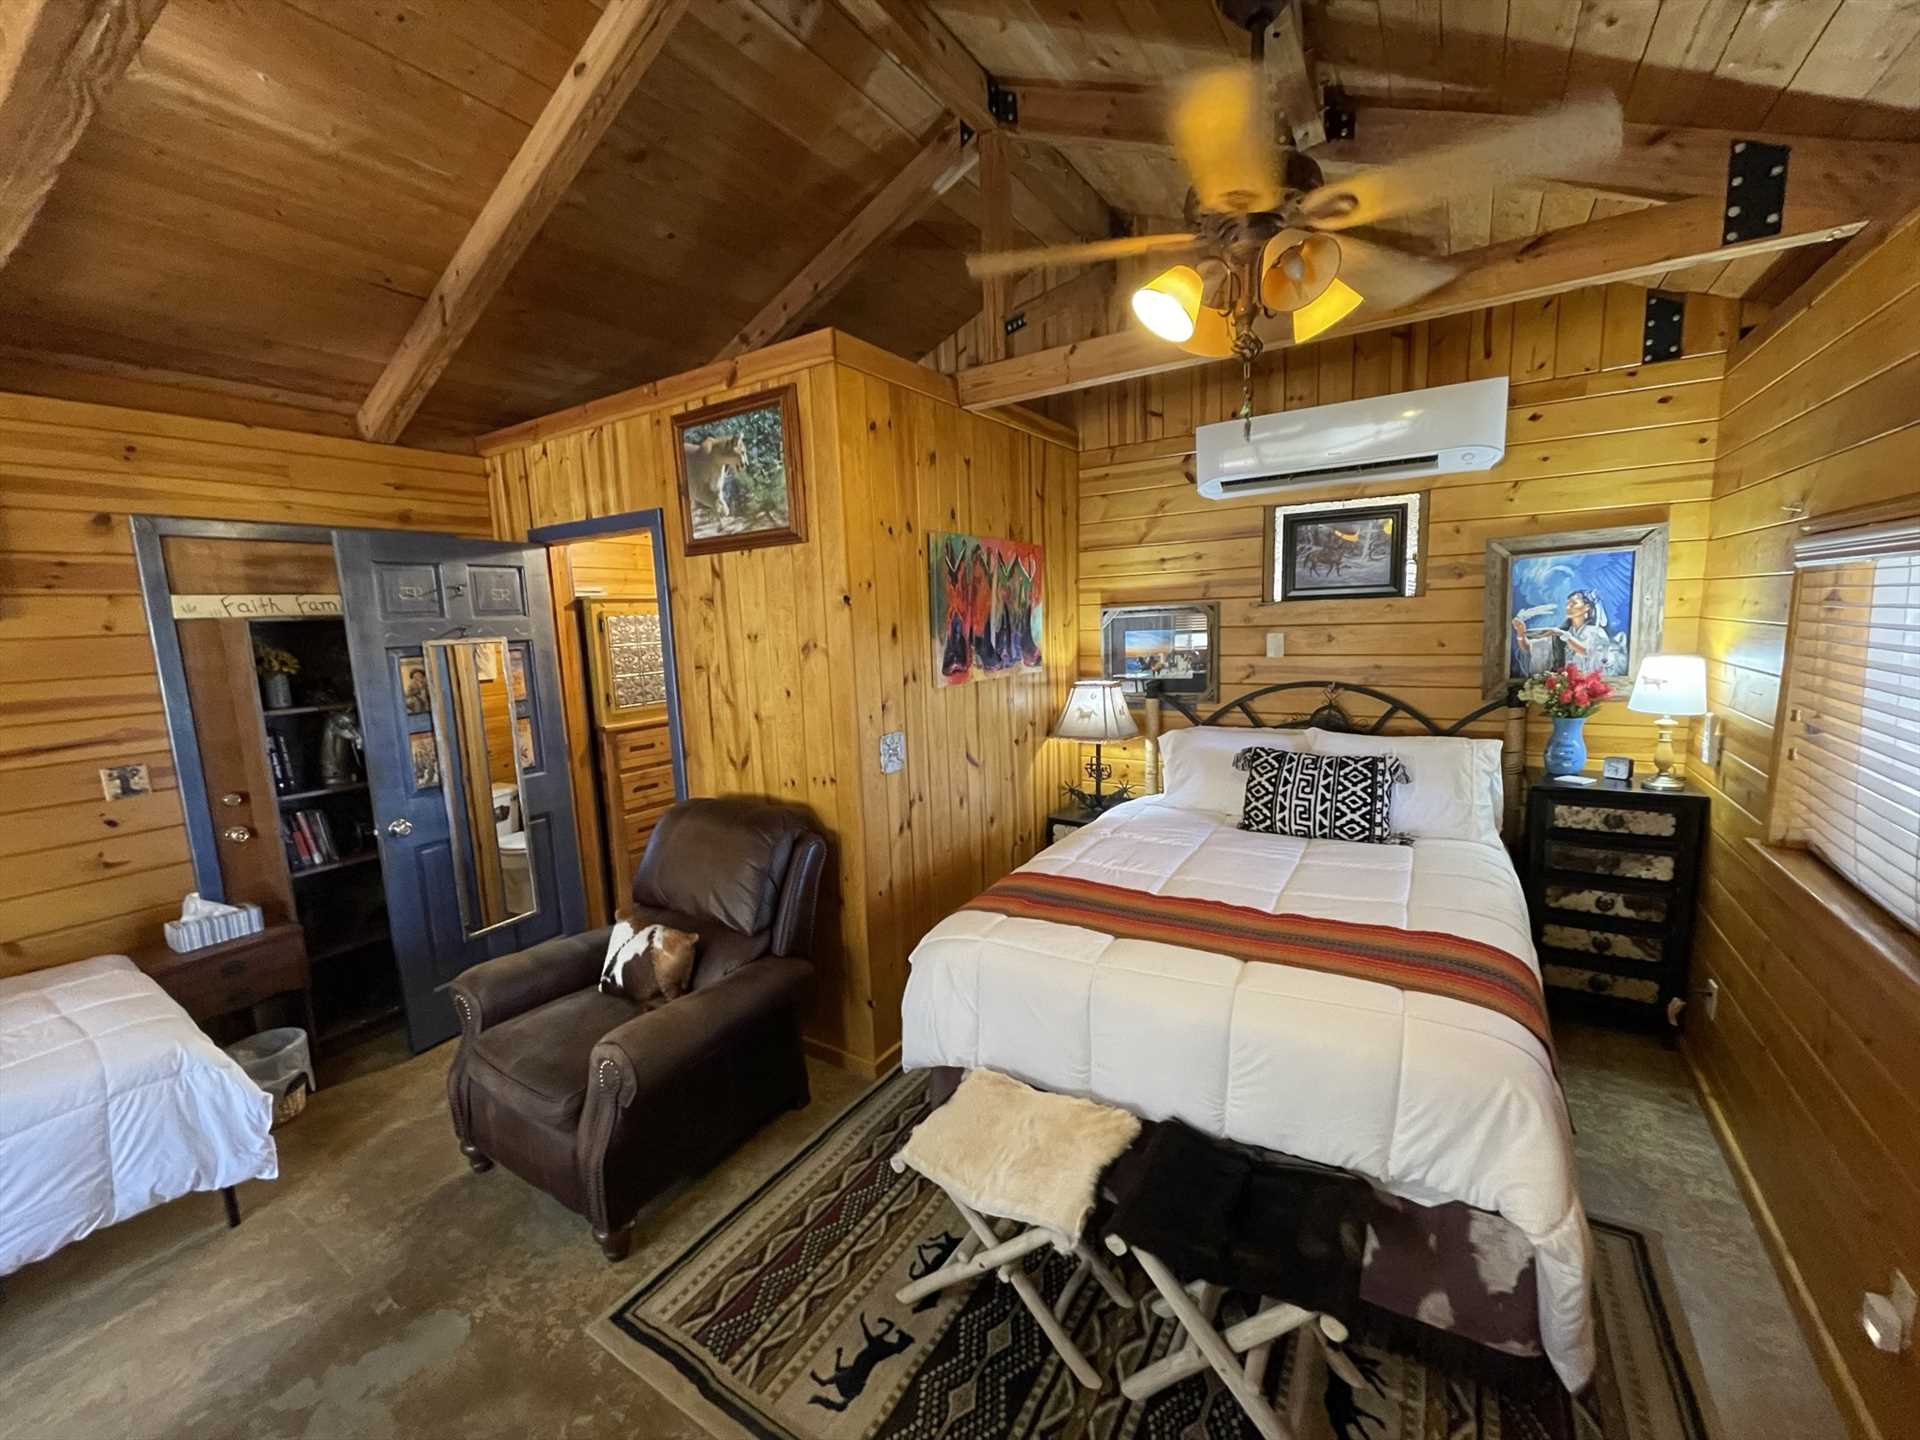                                                 A warm and welcoming queen-sized bed is tucked into its own golden-paneled nook at Giddy Up, covered in fresh linens.